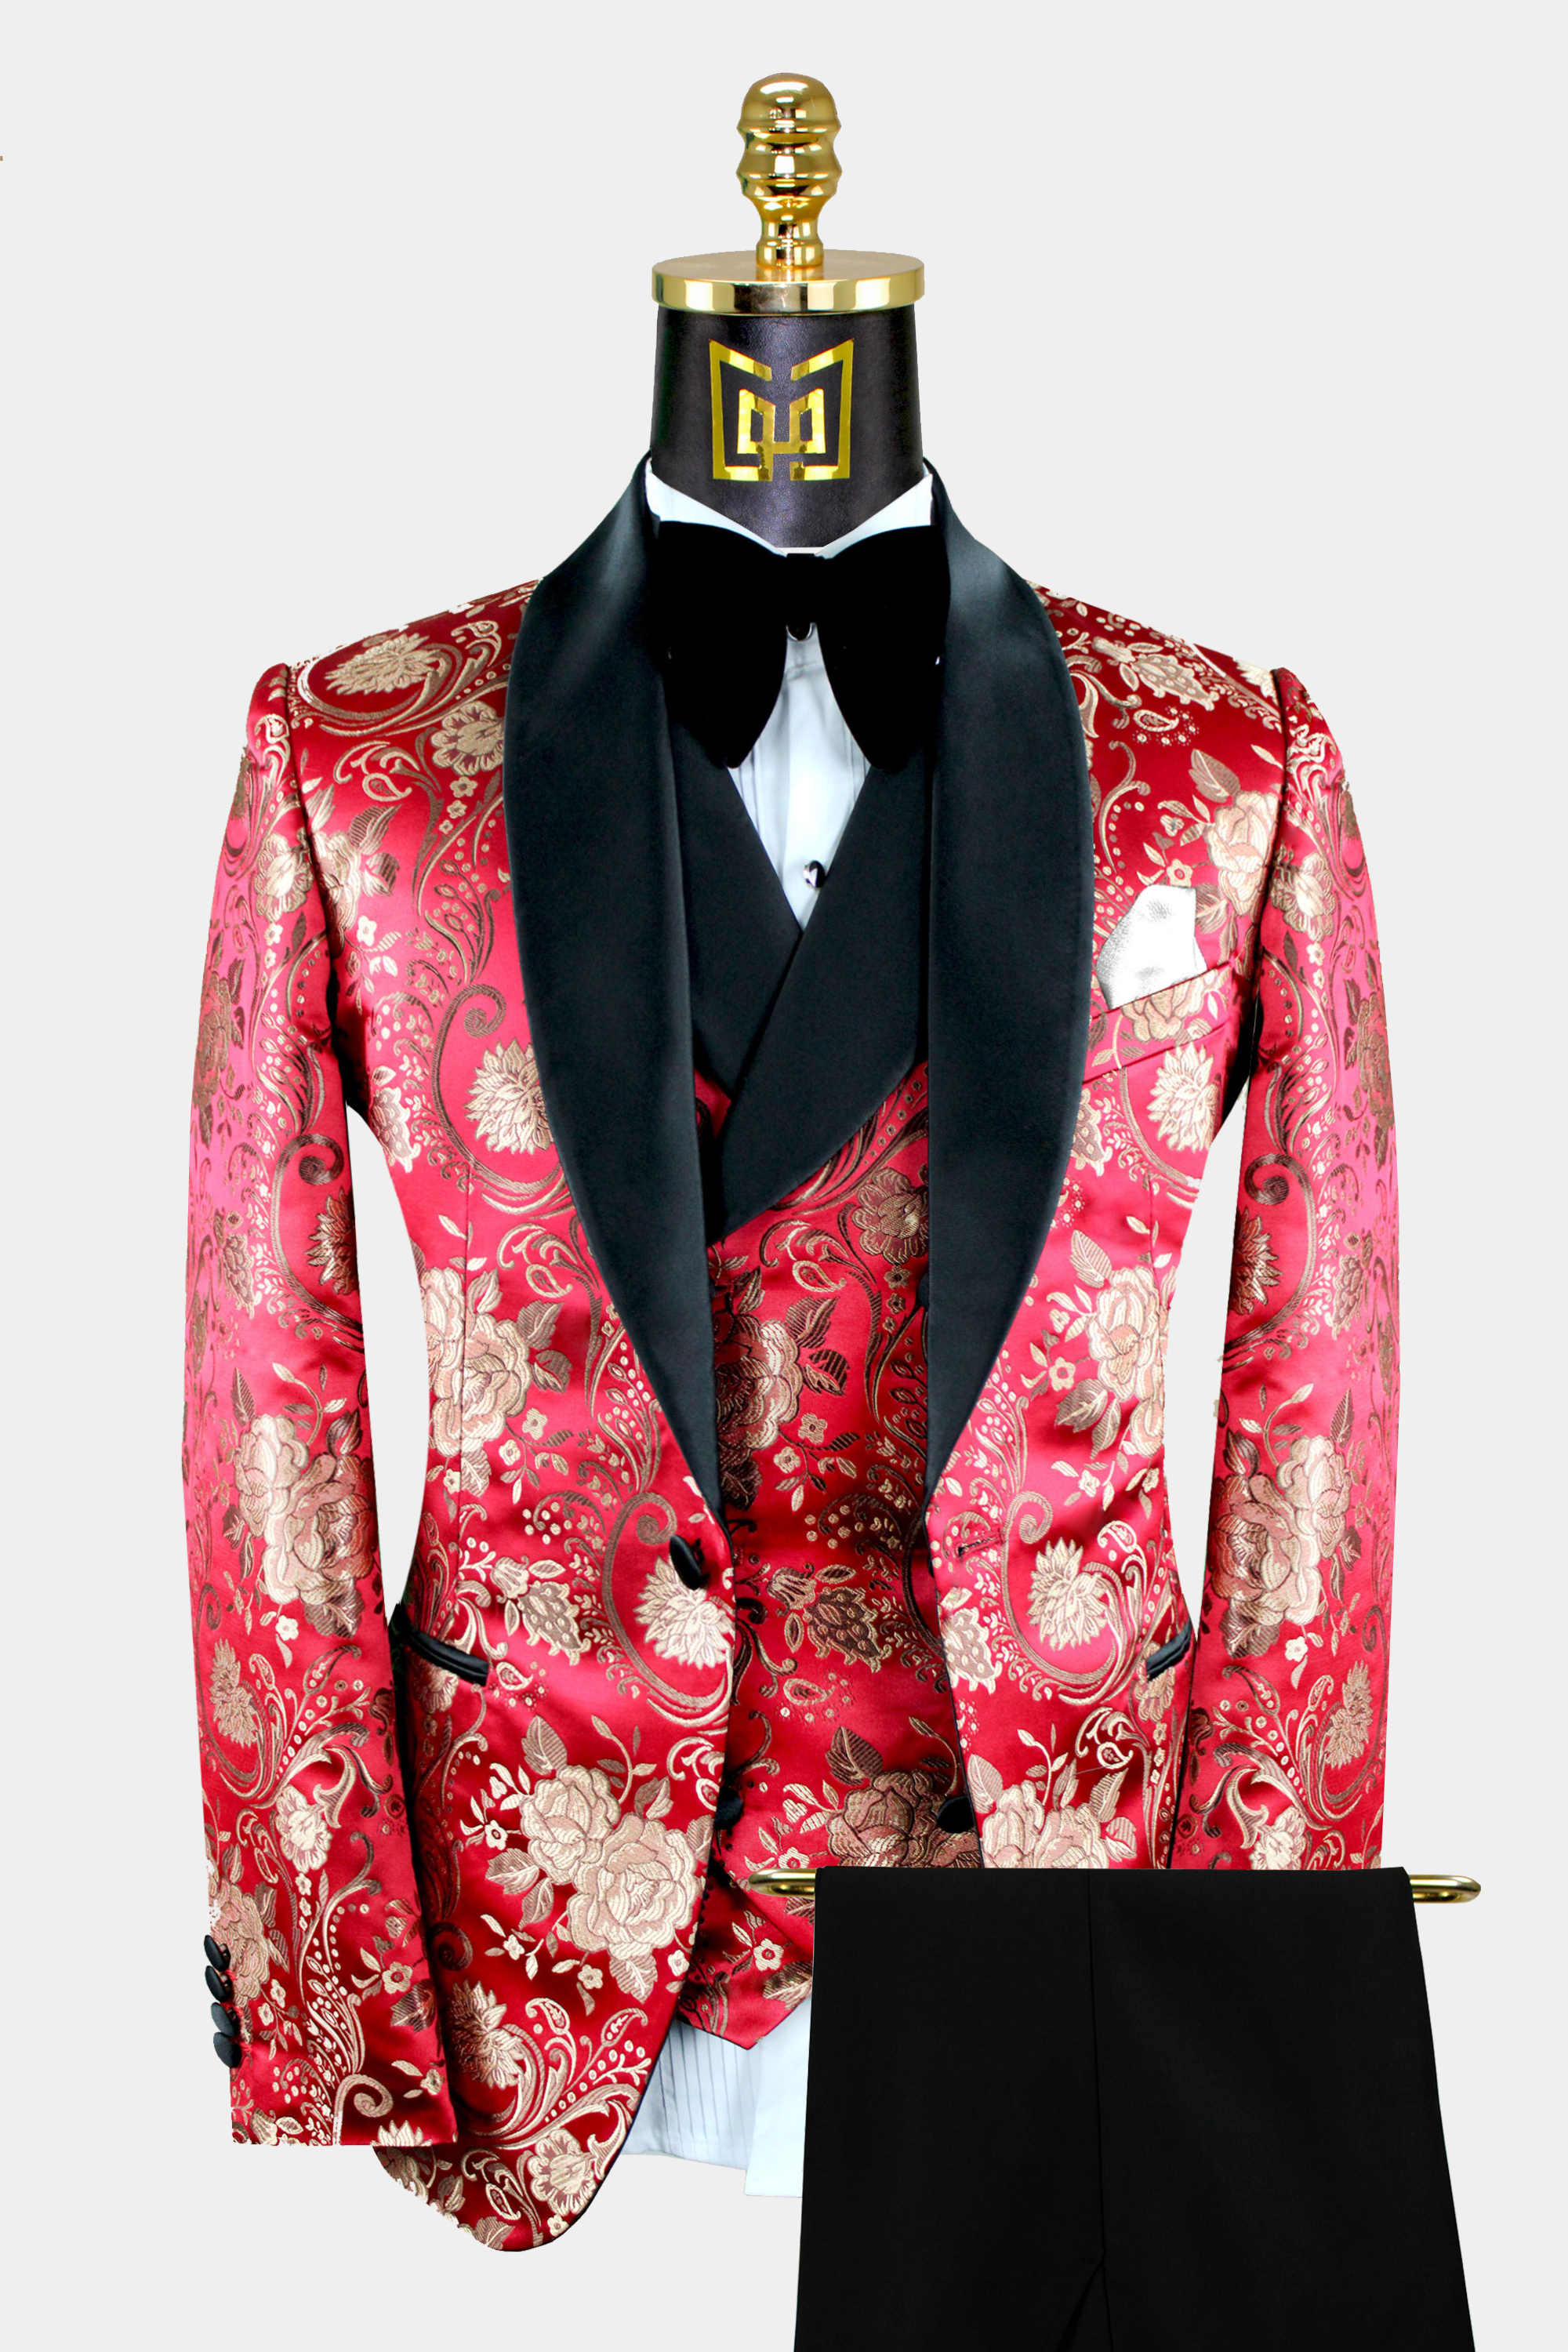 Ruby Red & Gold Floral Tuxedo - 3 Piece